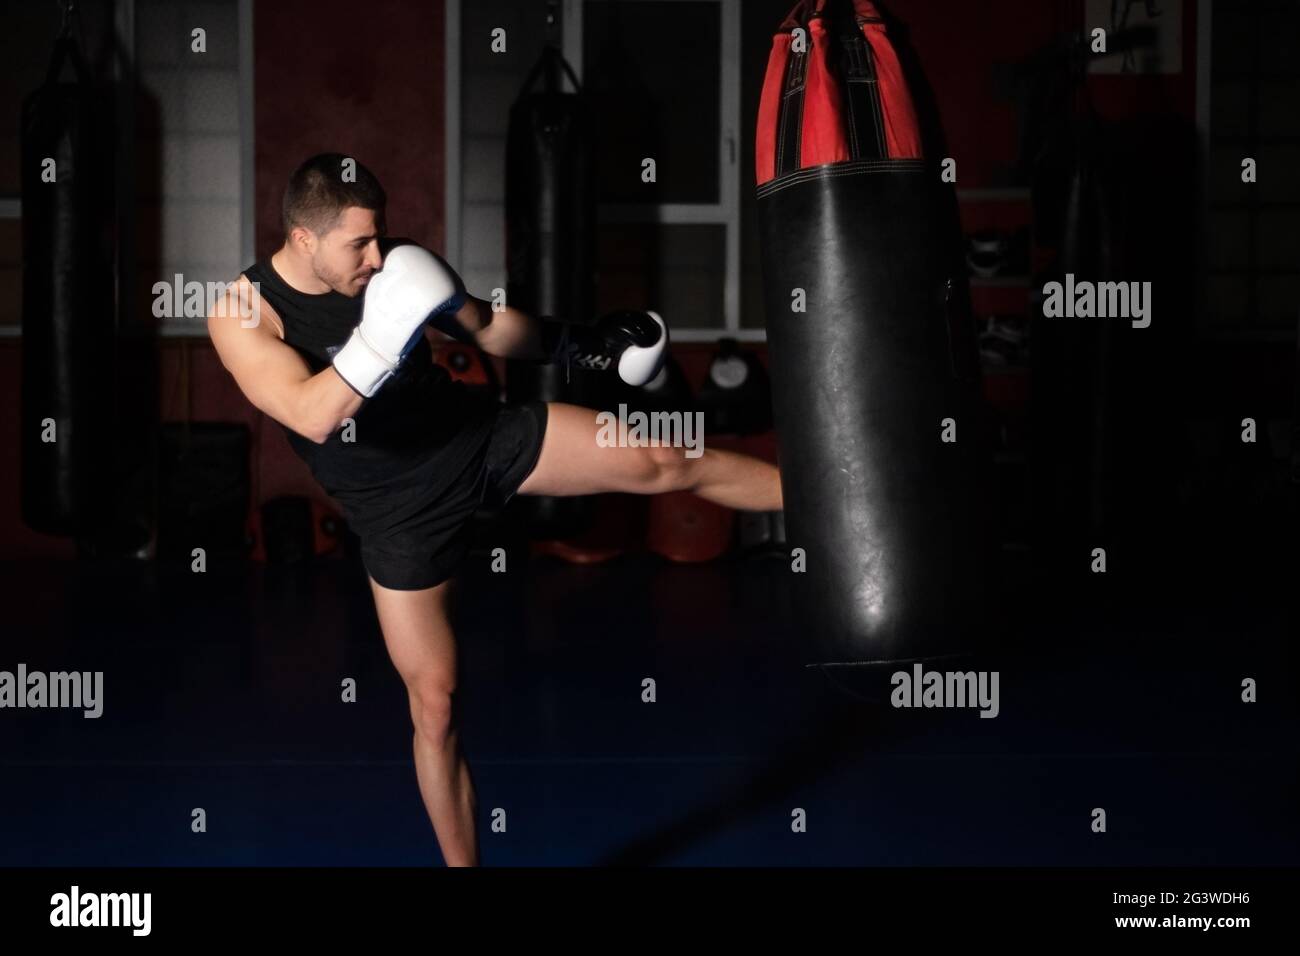 Muscular handsome kickboxing fighter giving a forceful kick during a practise round with a boxing bag. Stock Photo